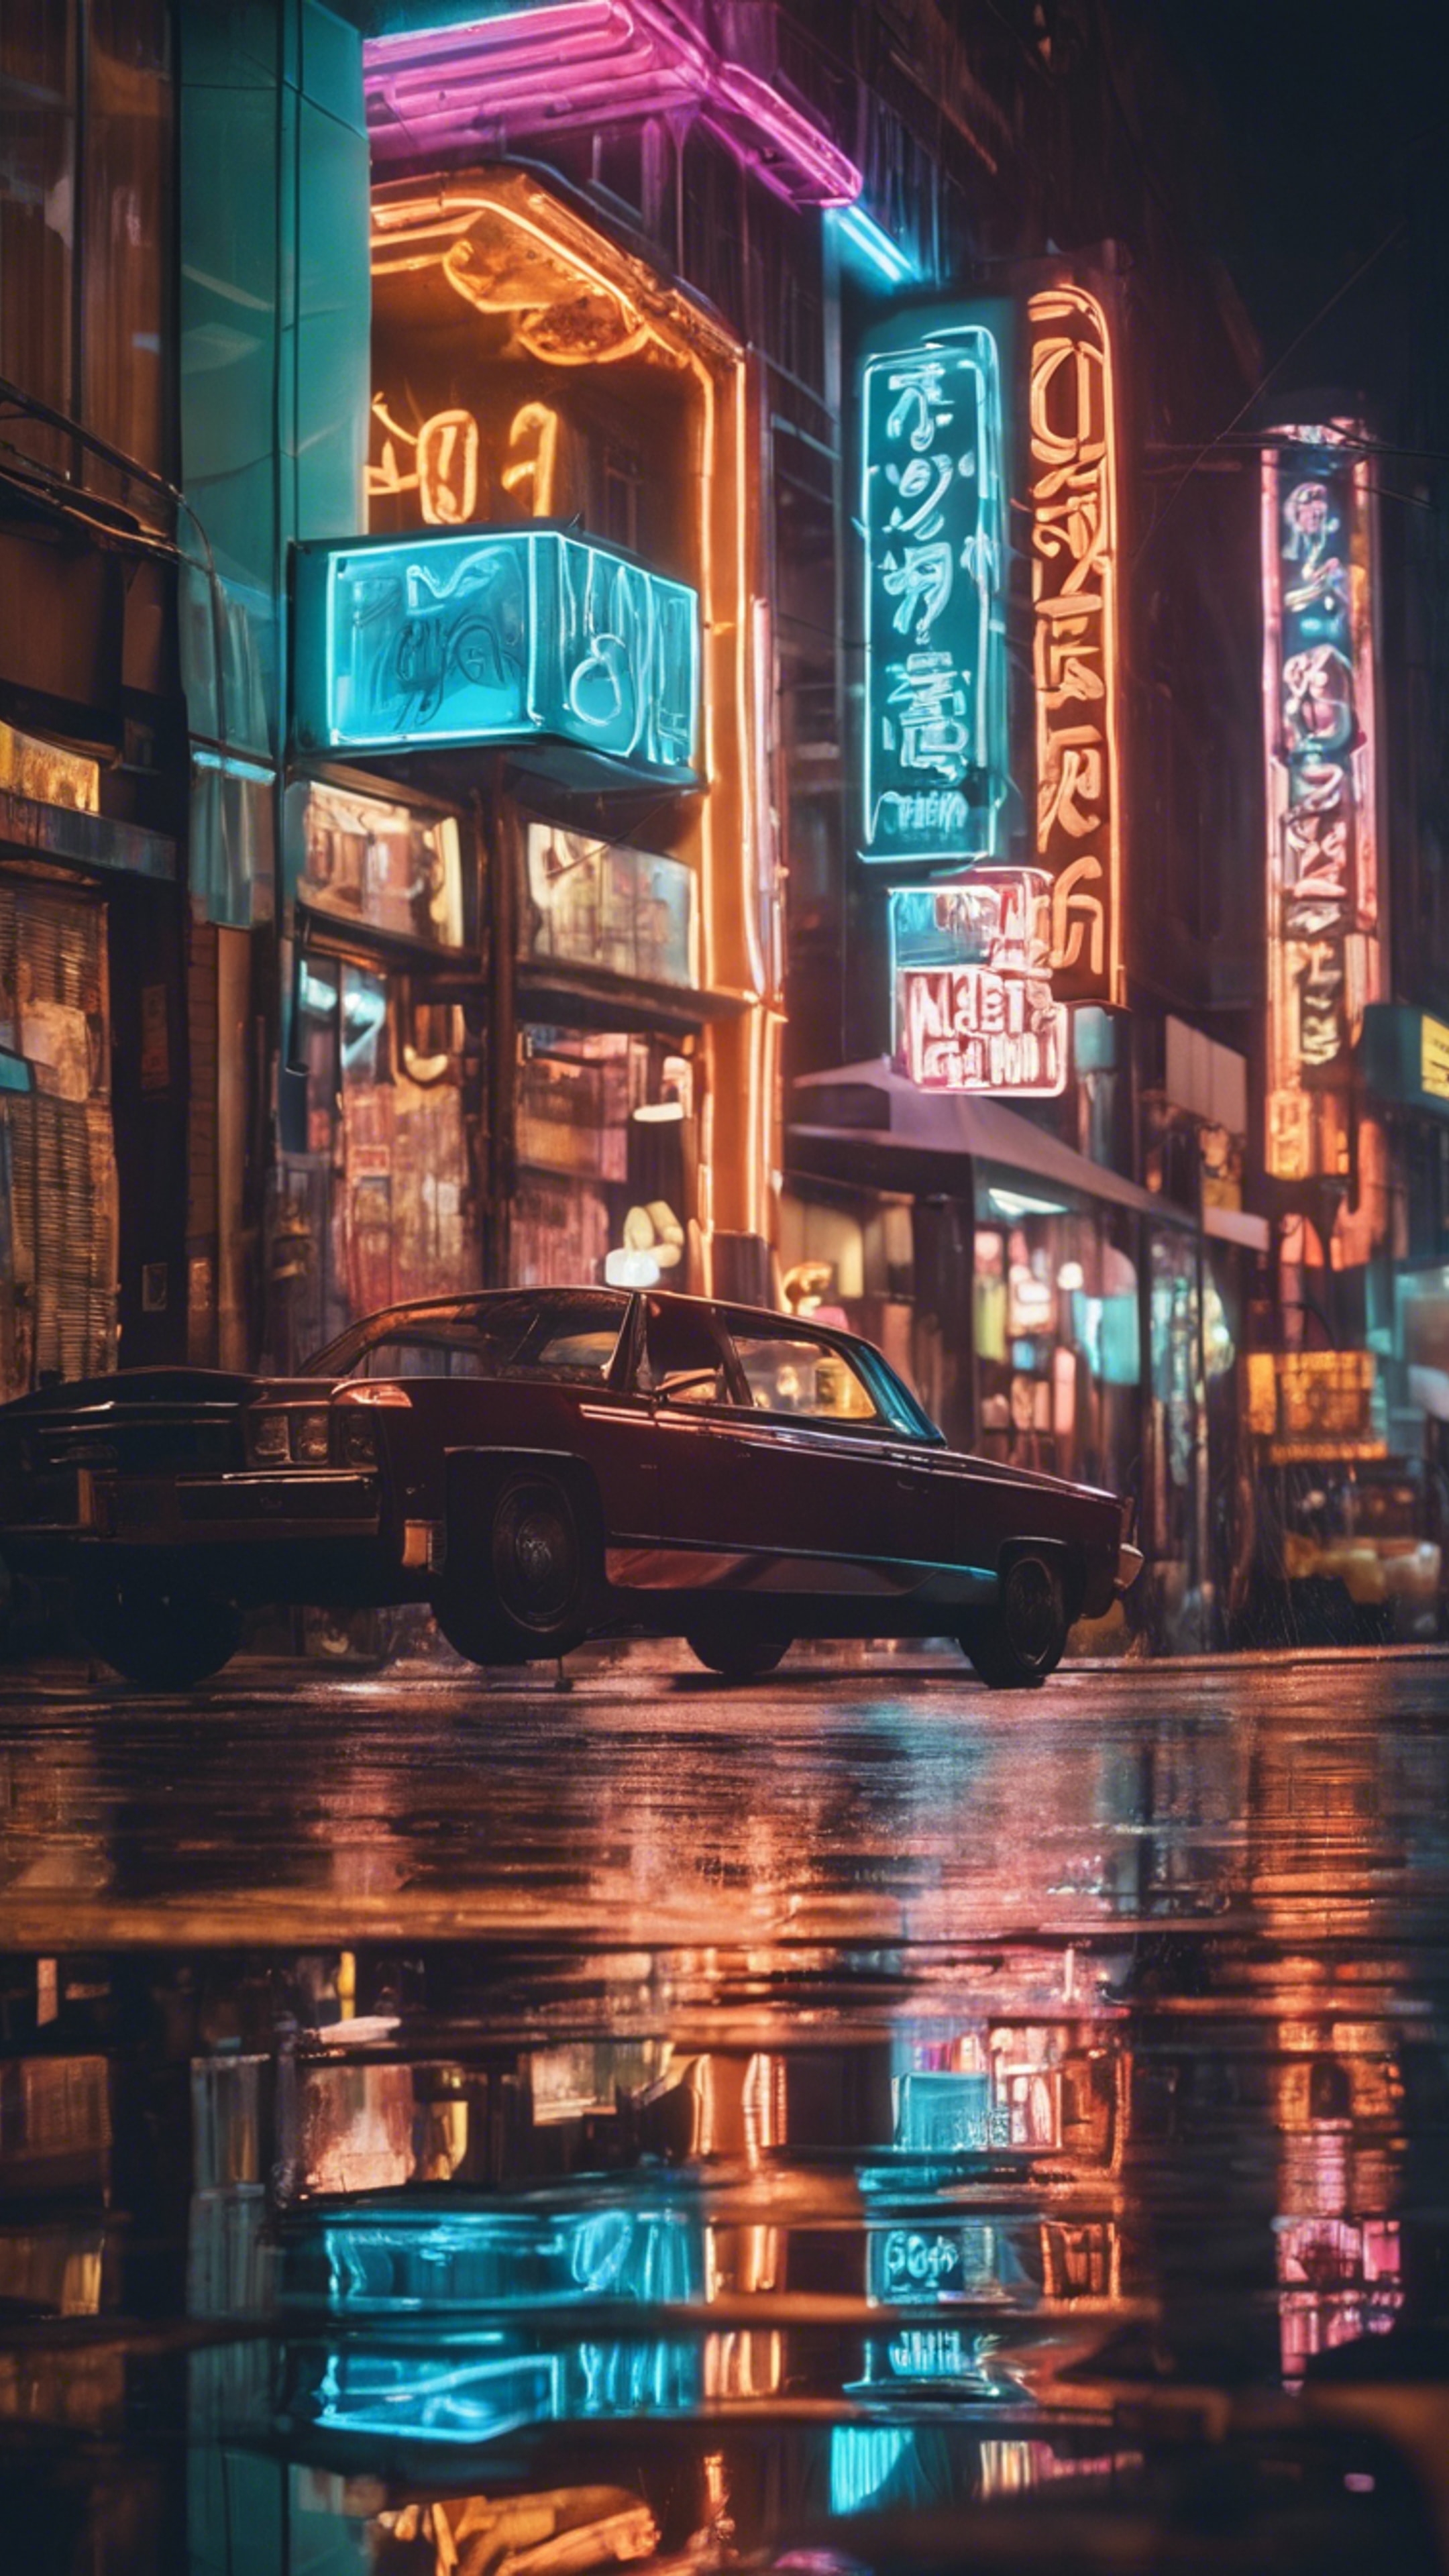 A dream vision of neon signs reflected on wet city streets at night. 牆紙[79232e509baa4ed0a24c]